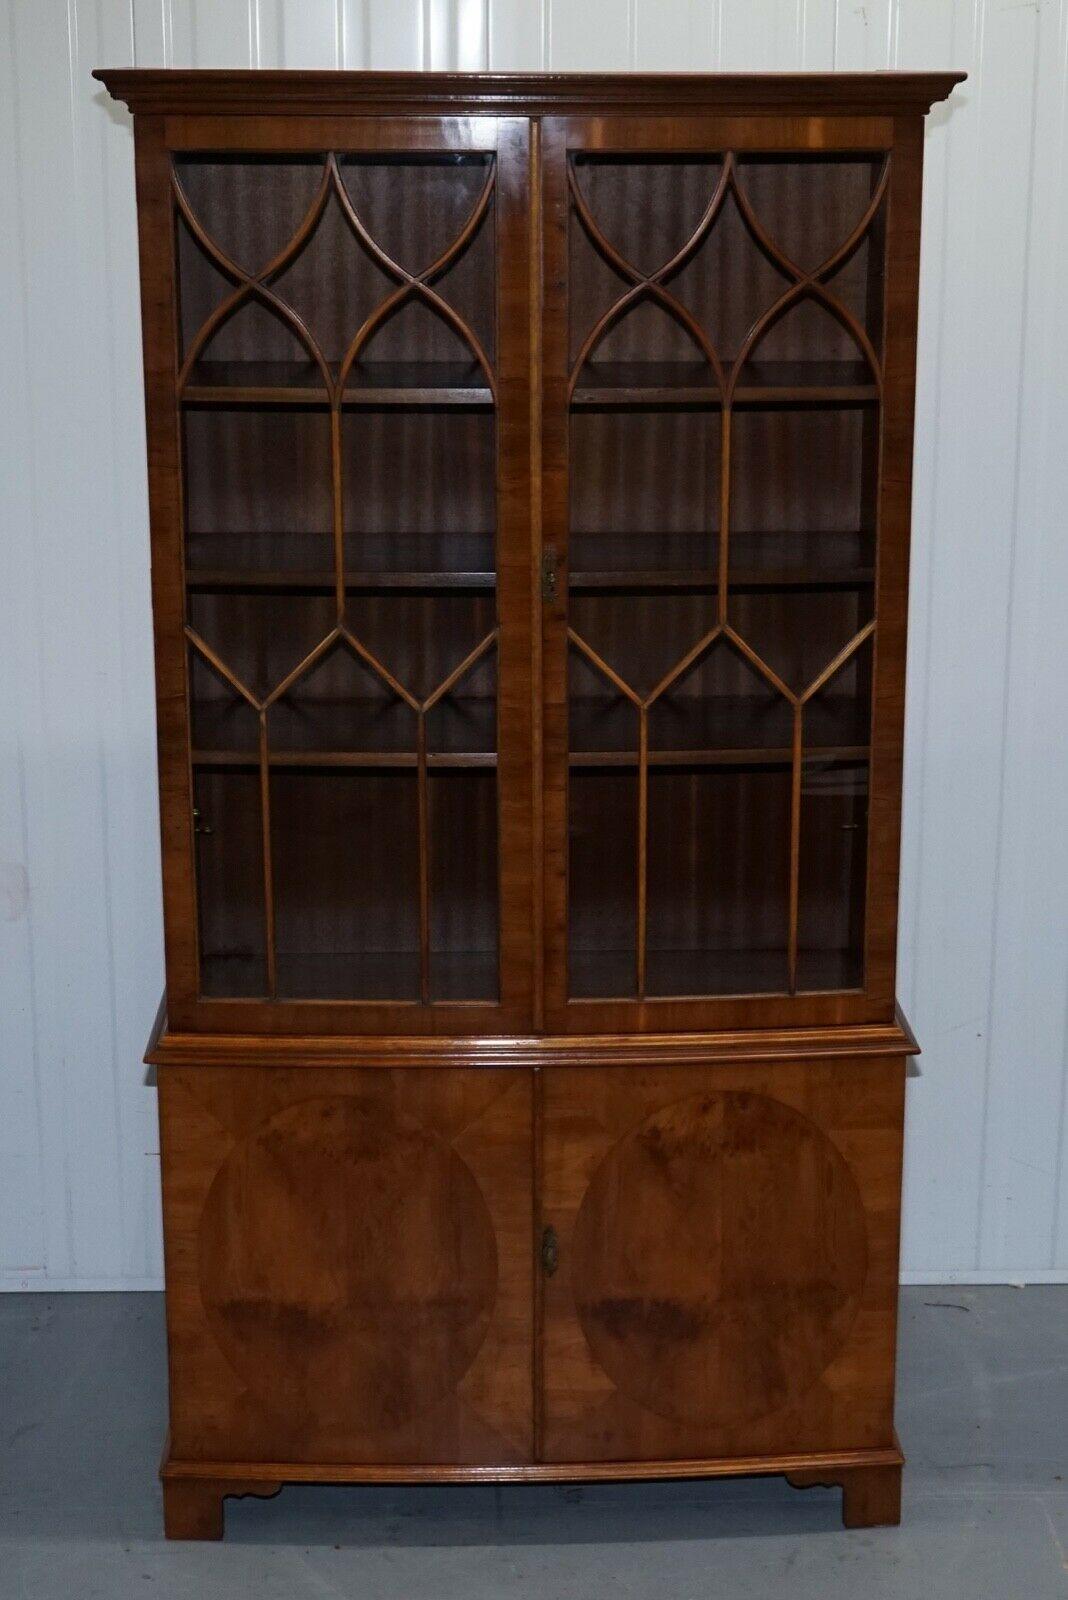 Hand-Crafted Beautiful Vintage Burr Yew Wood Display Cabinet with Shelves